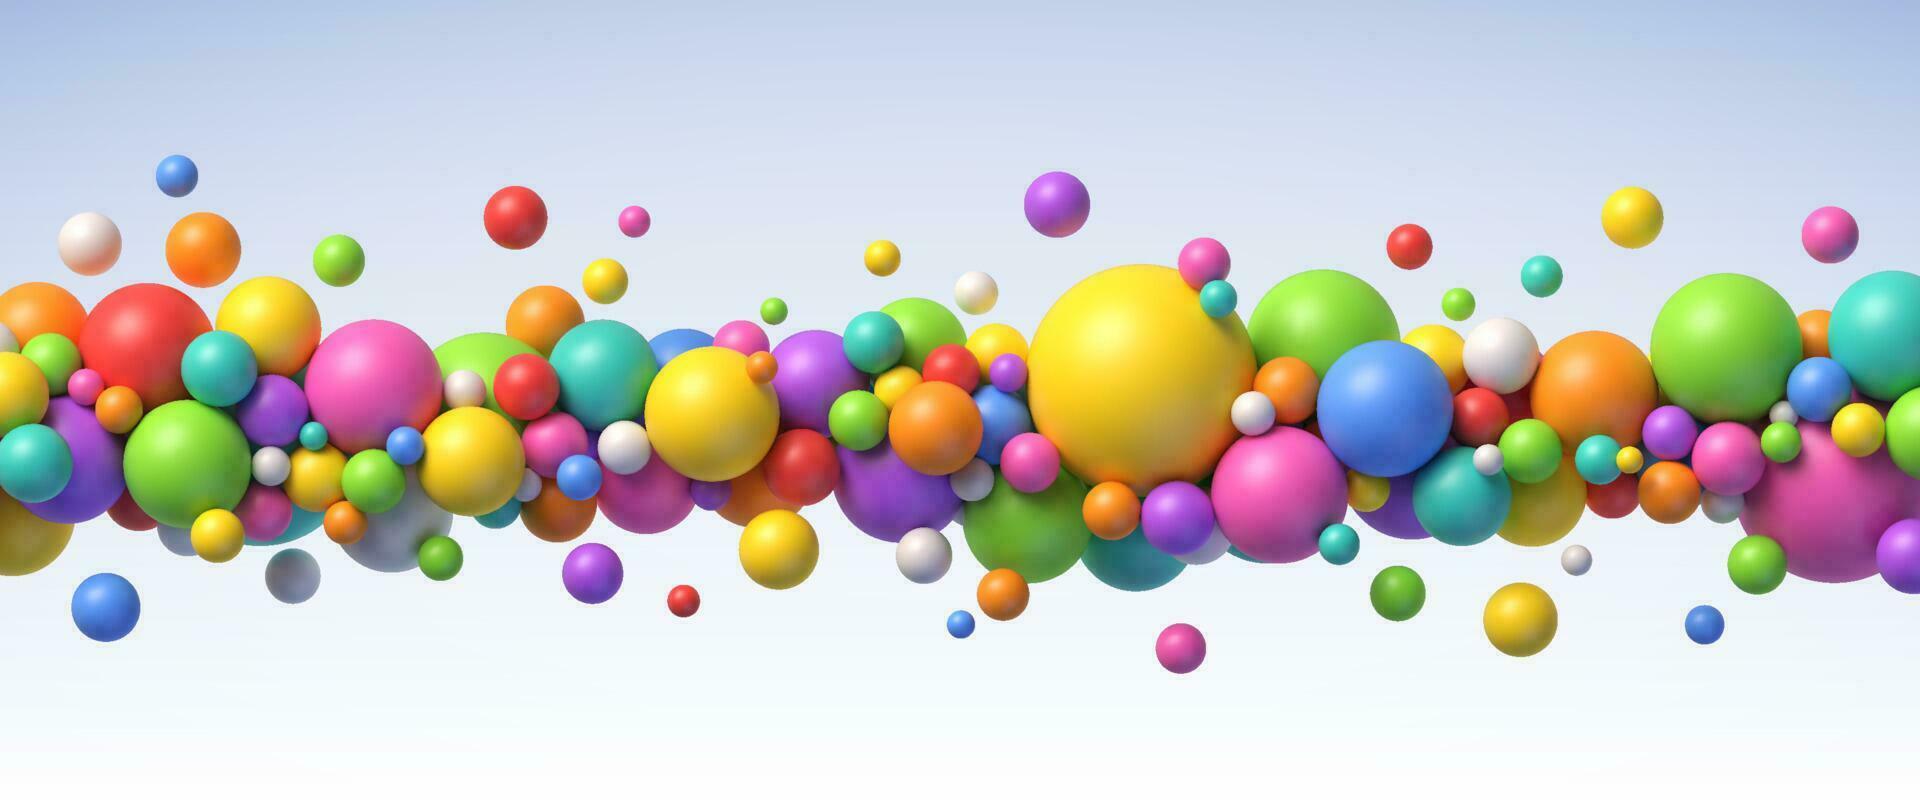 Multicolored flying spheres. Abstract composition with colorful balls in different sizes. Realistic vector background